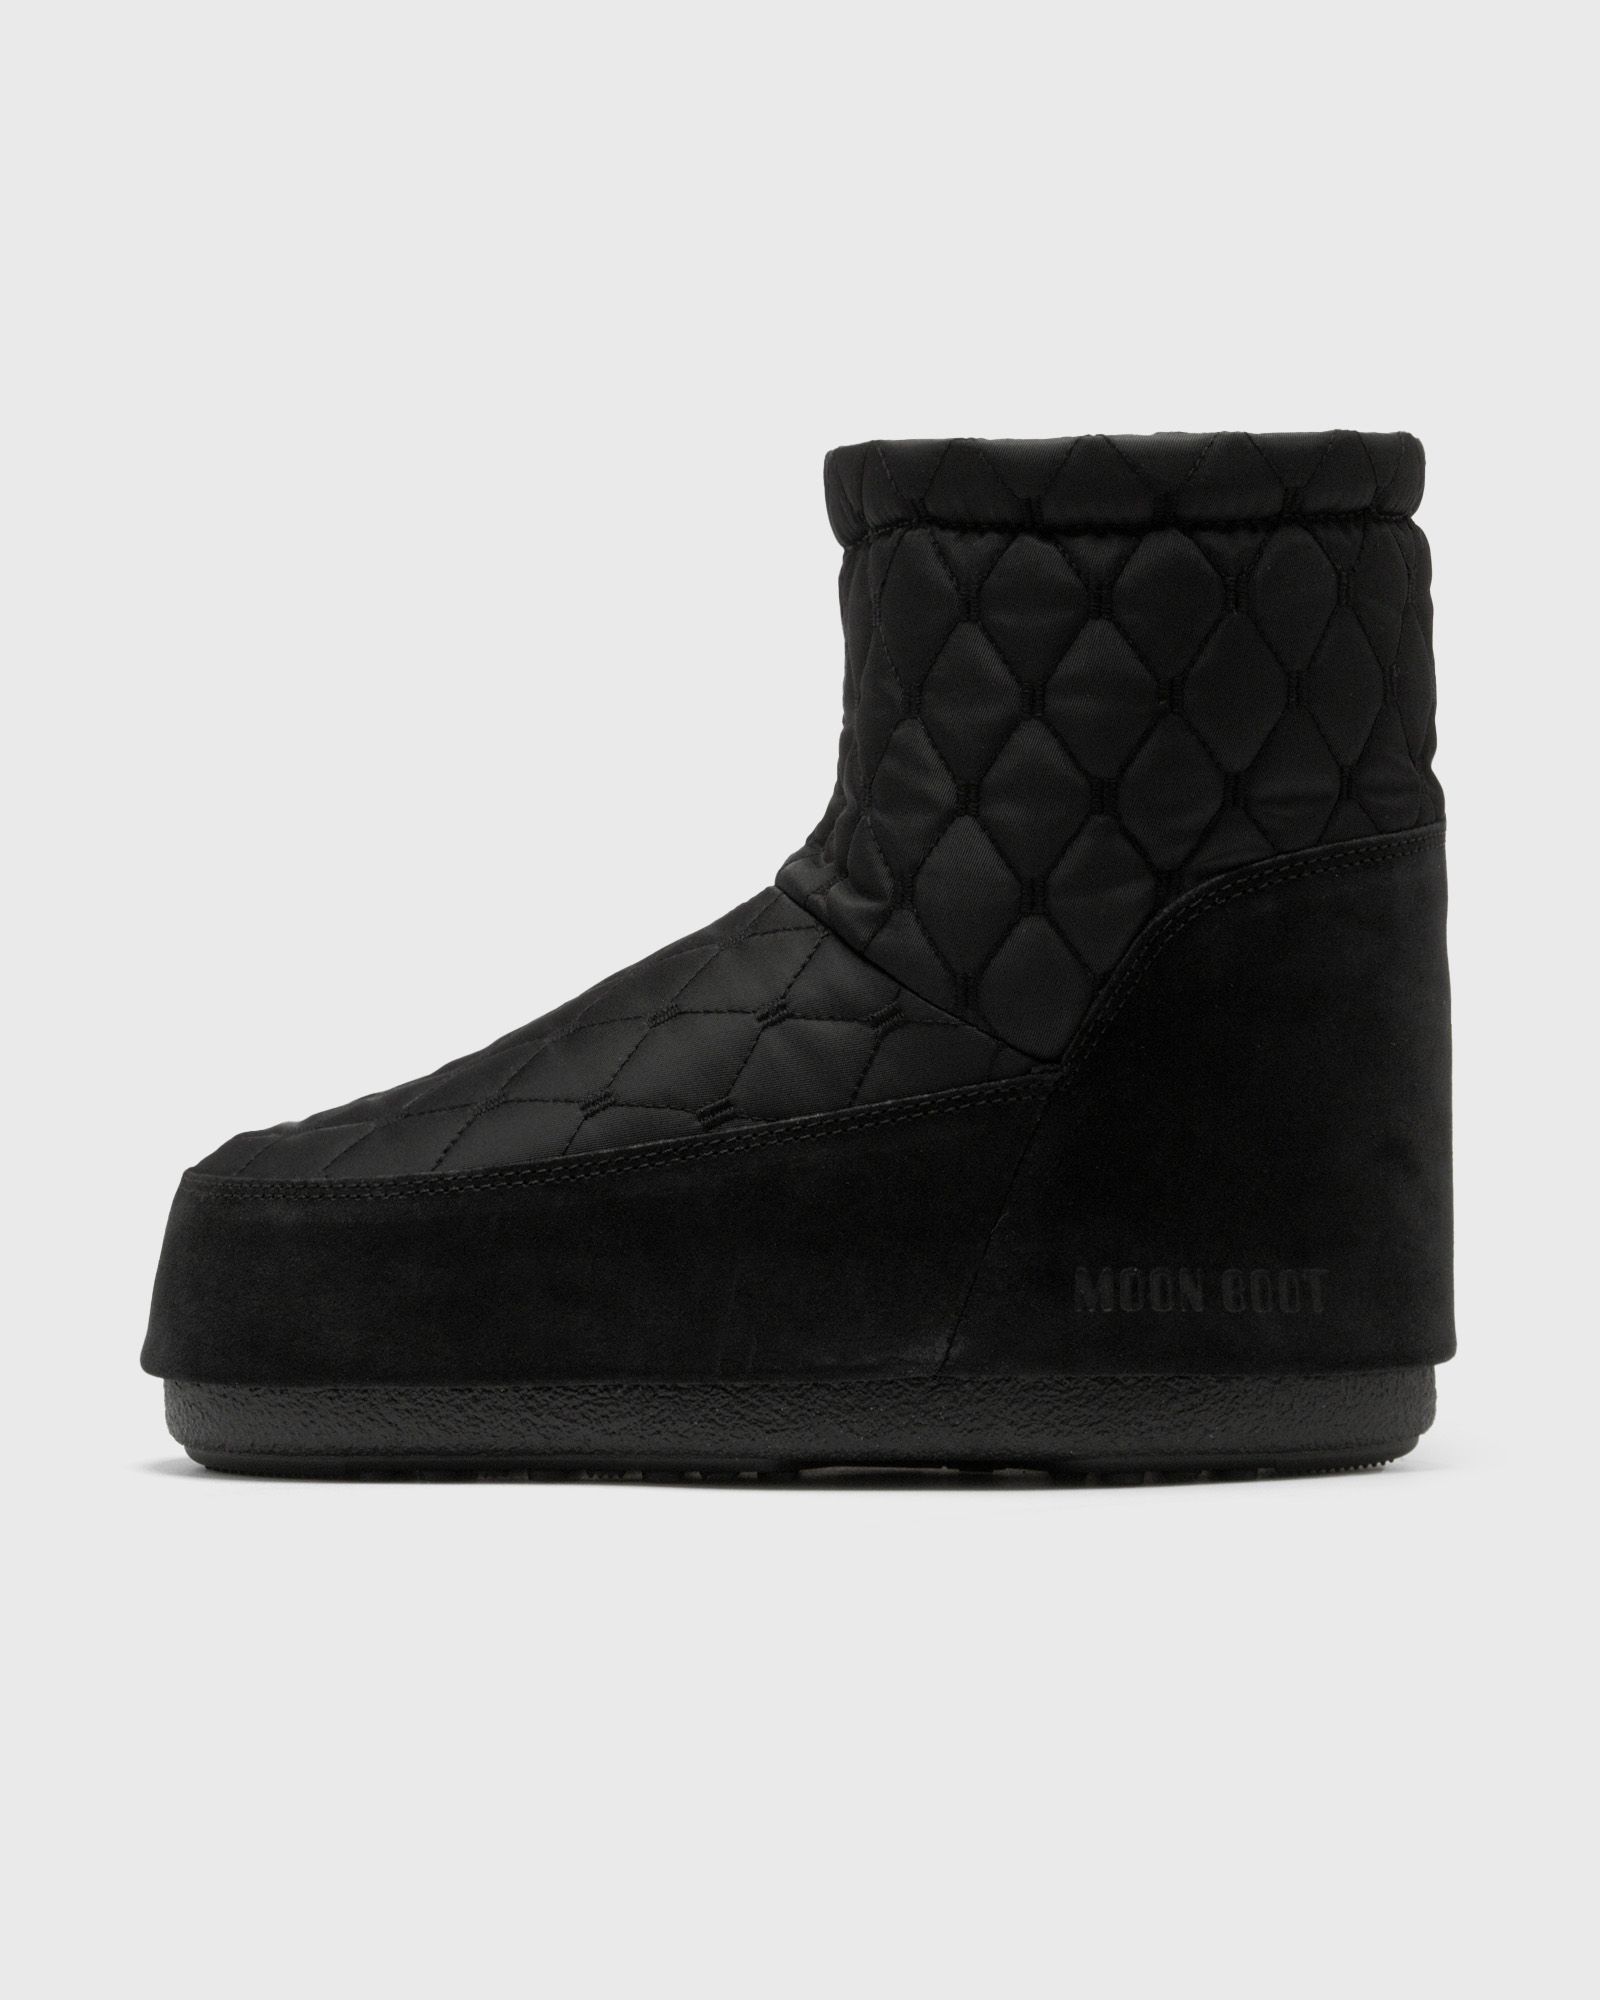 Moon Boot - icon low nolace quilted men boots black in größe:42-44